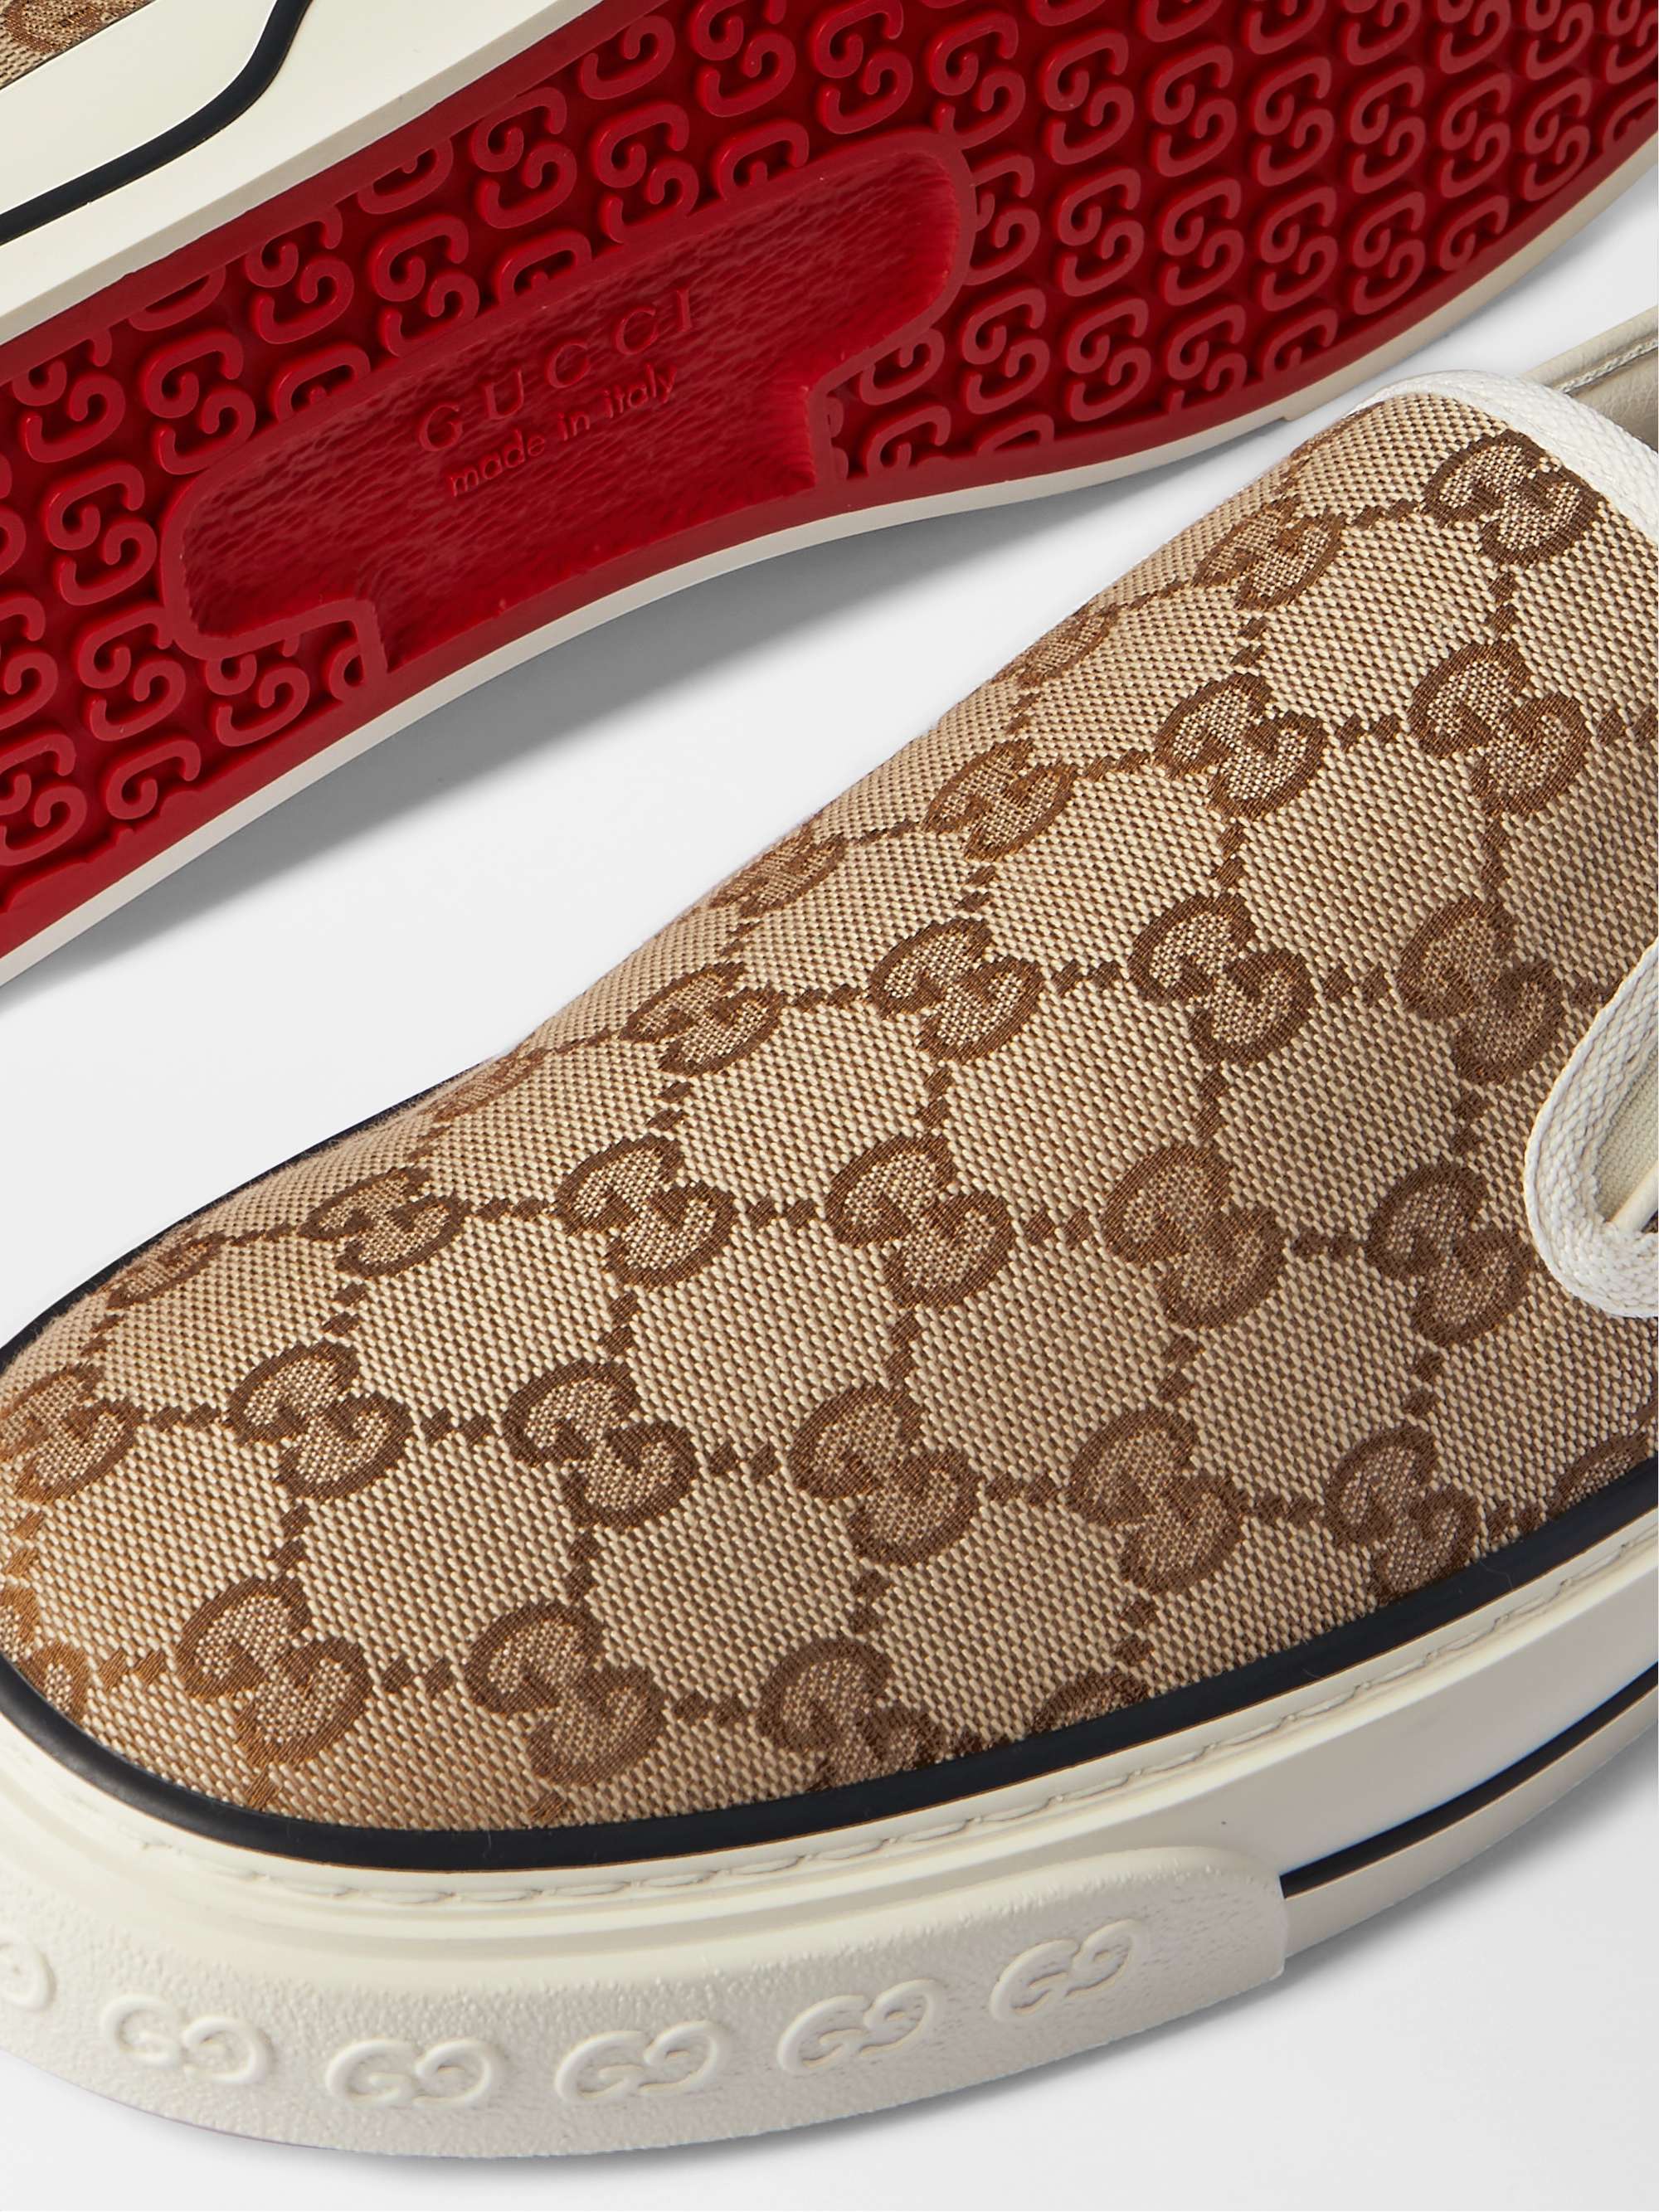 GUCCI Tennis 1977 Monogrammed Canvas Slip-On Sneakers